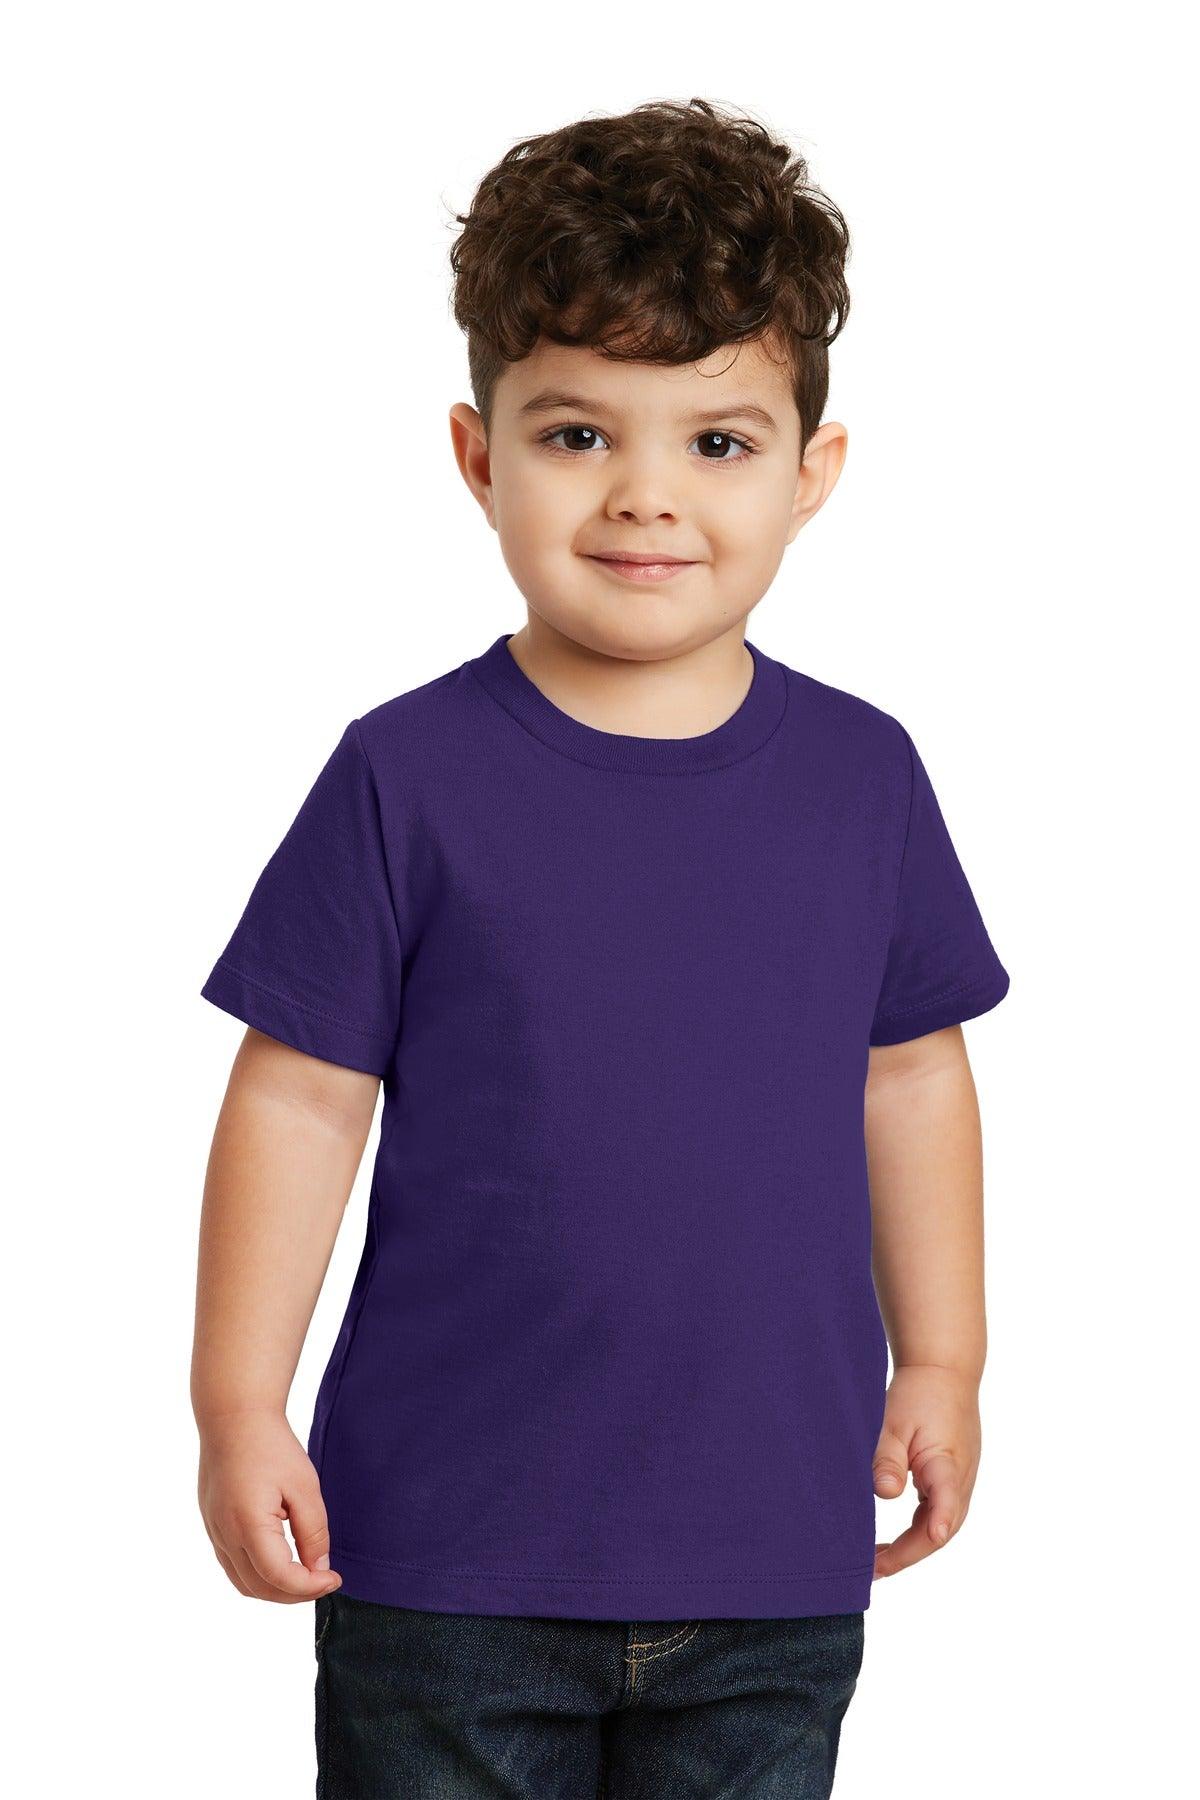 Port & Company Toddler Fan Favorite Tee. PC450TD - Dresses Max